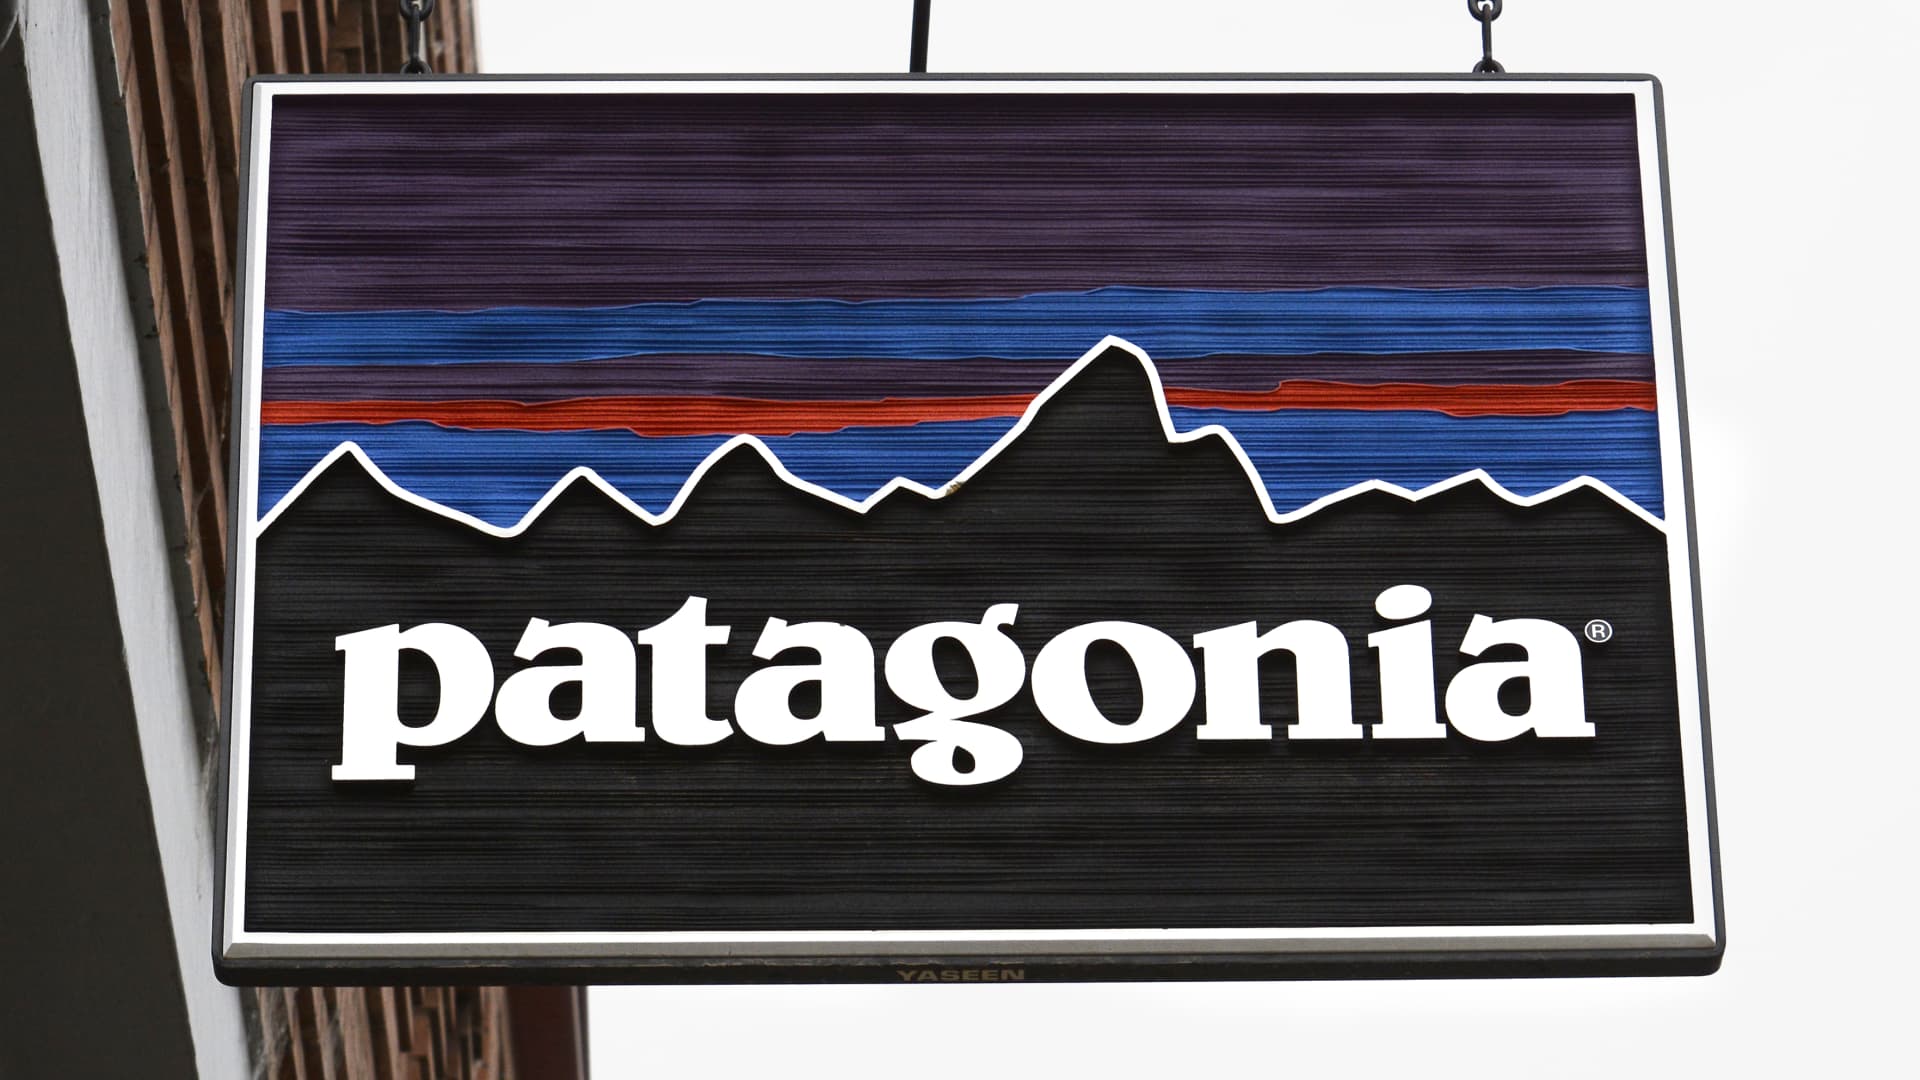 A Patagonia store is among the several shops catering to outdoor enthusiasts in Telluride, Colorado.